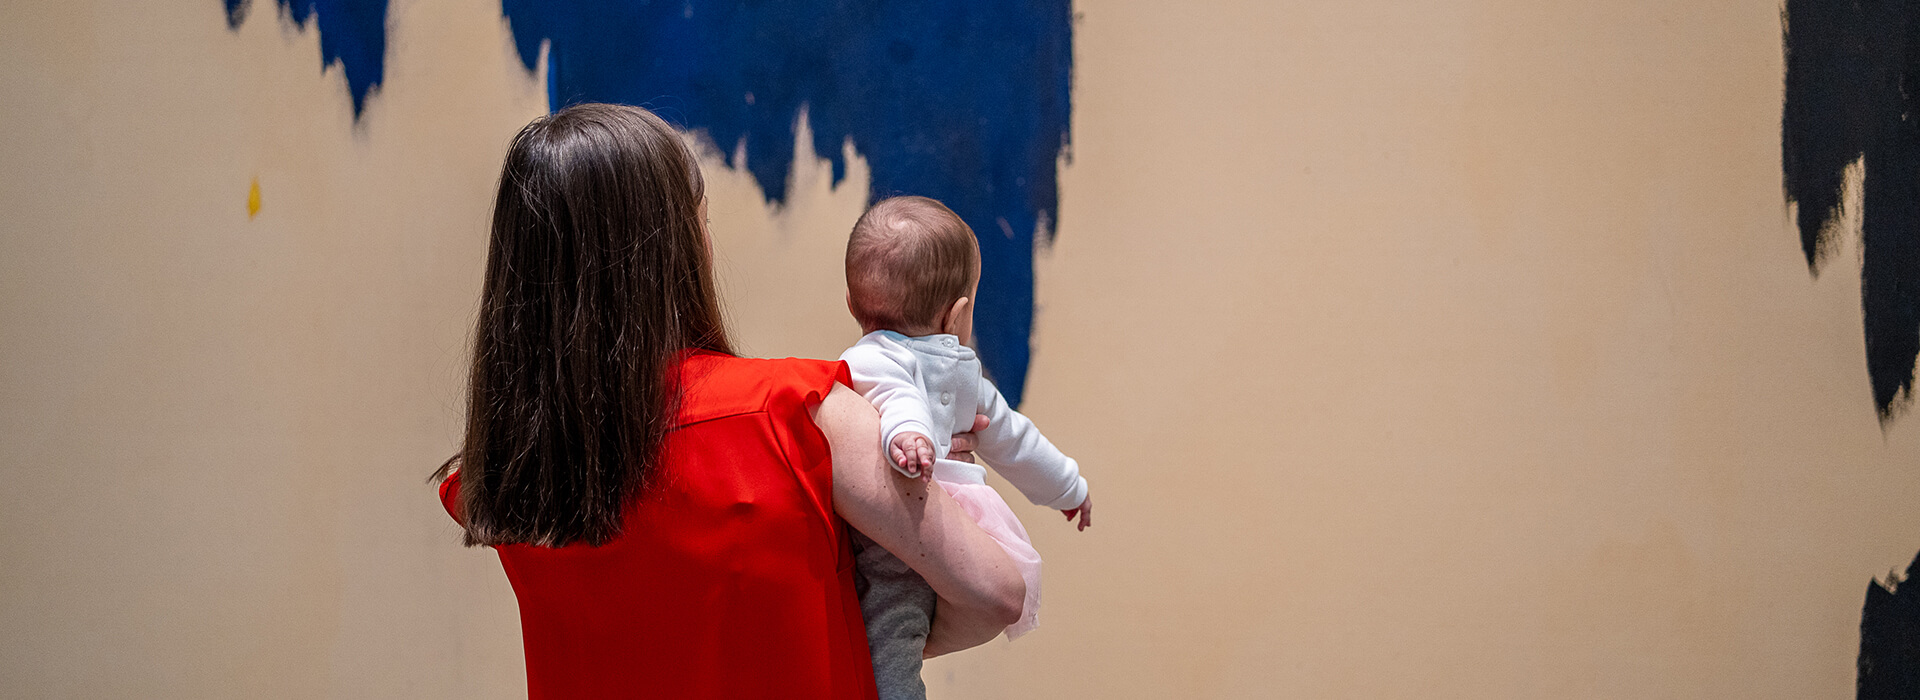 A mother holds her infant as they look at art together